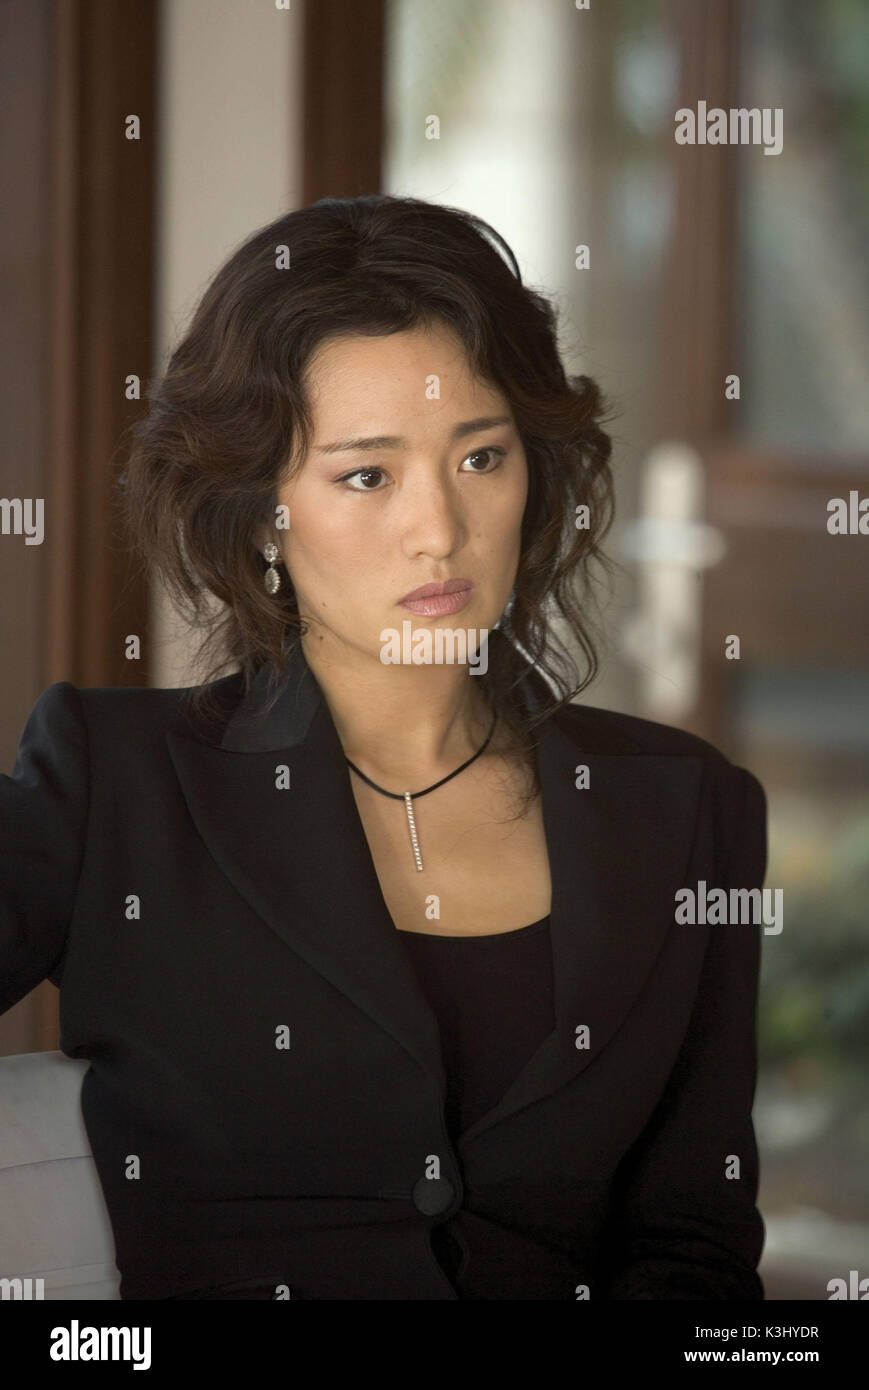 GONG LI as Chinese-Cuban financial criminal Isabella in Miami Vice, the feature film crime drama that liberates what is adult, dangerous and alluring about working deeply undercover. MIAMI VICE GONG LI as Chinese-Cuban financial criminal Isabella GONG LI as Chinese-Cuban financial criminal Isabella in Miami Vice, the feature film crime drama that liberates what is adult, dangerous and alluring about working deeply undercover. Stock Photo